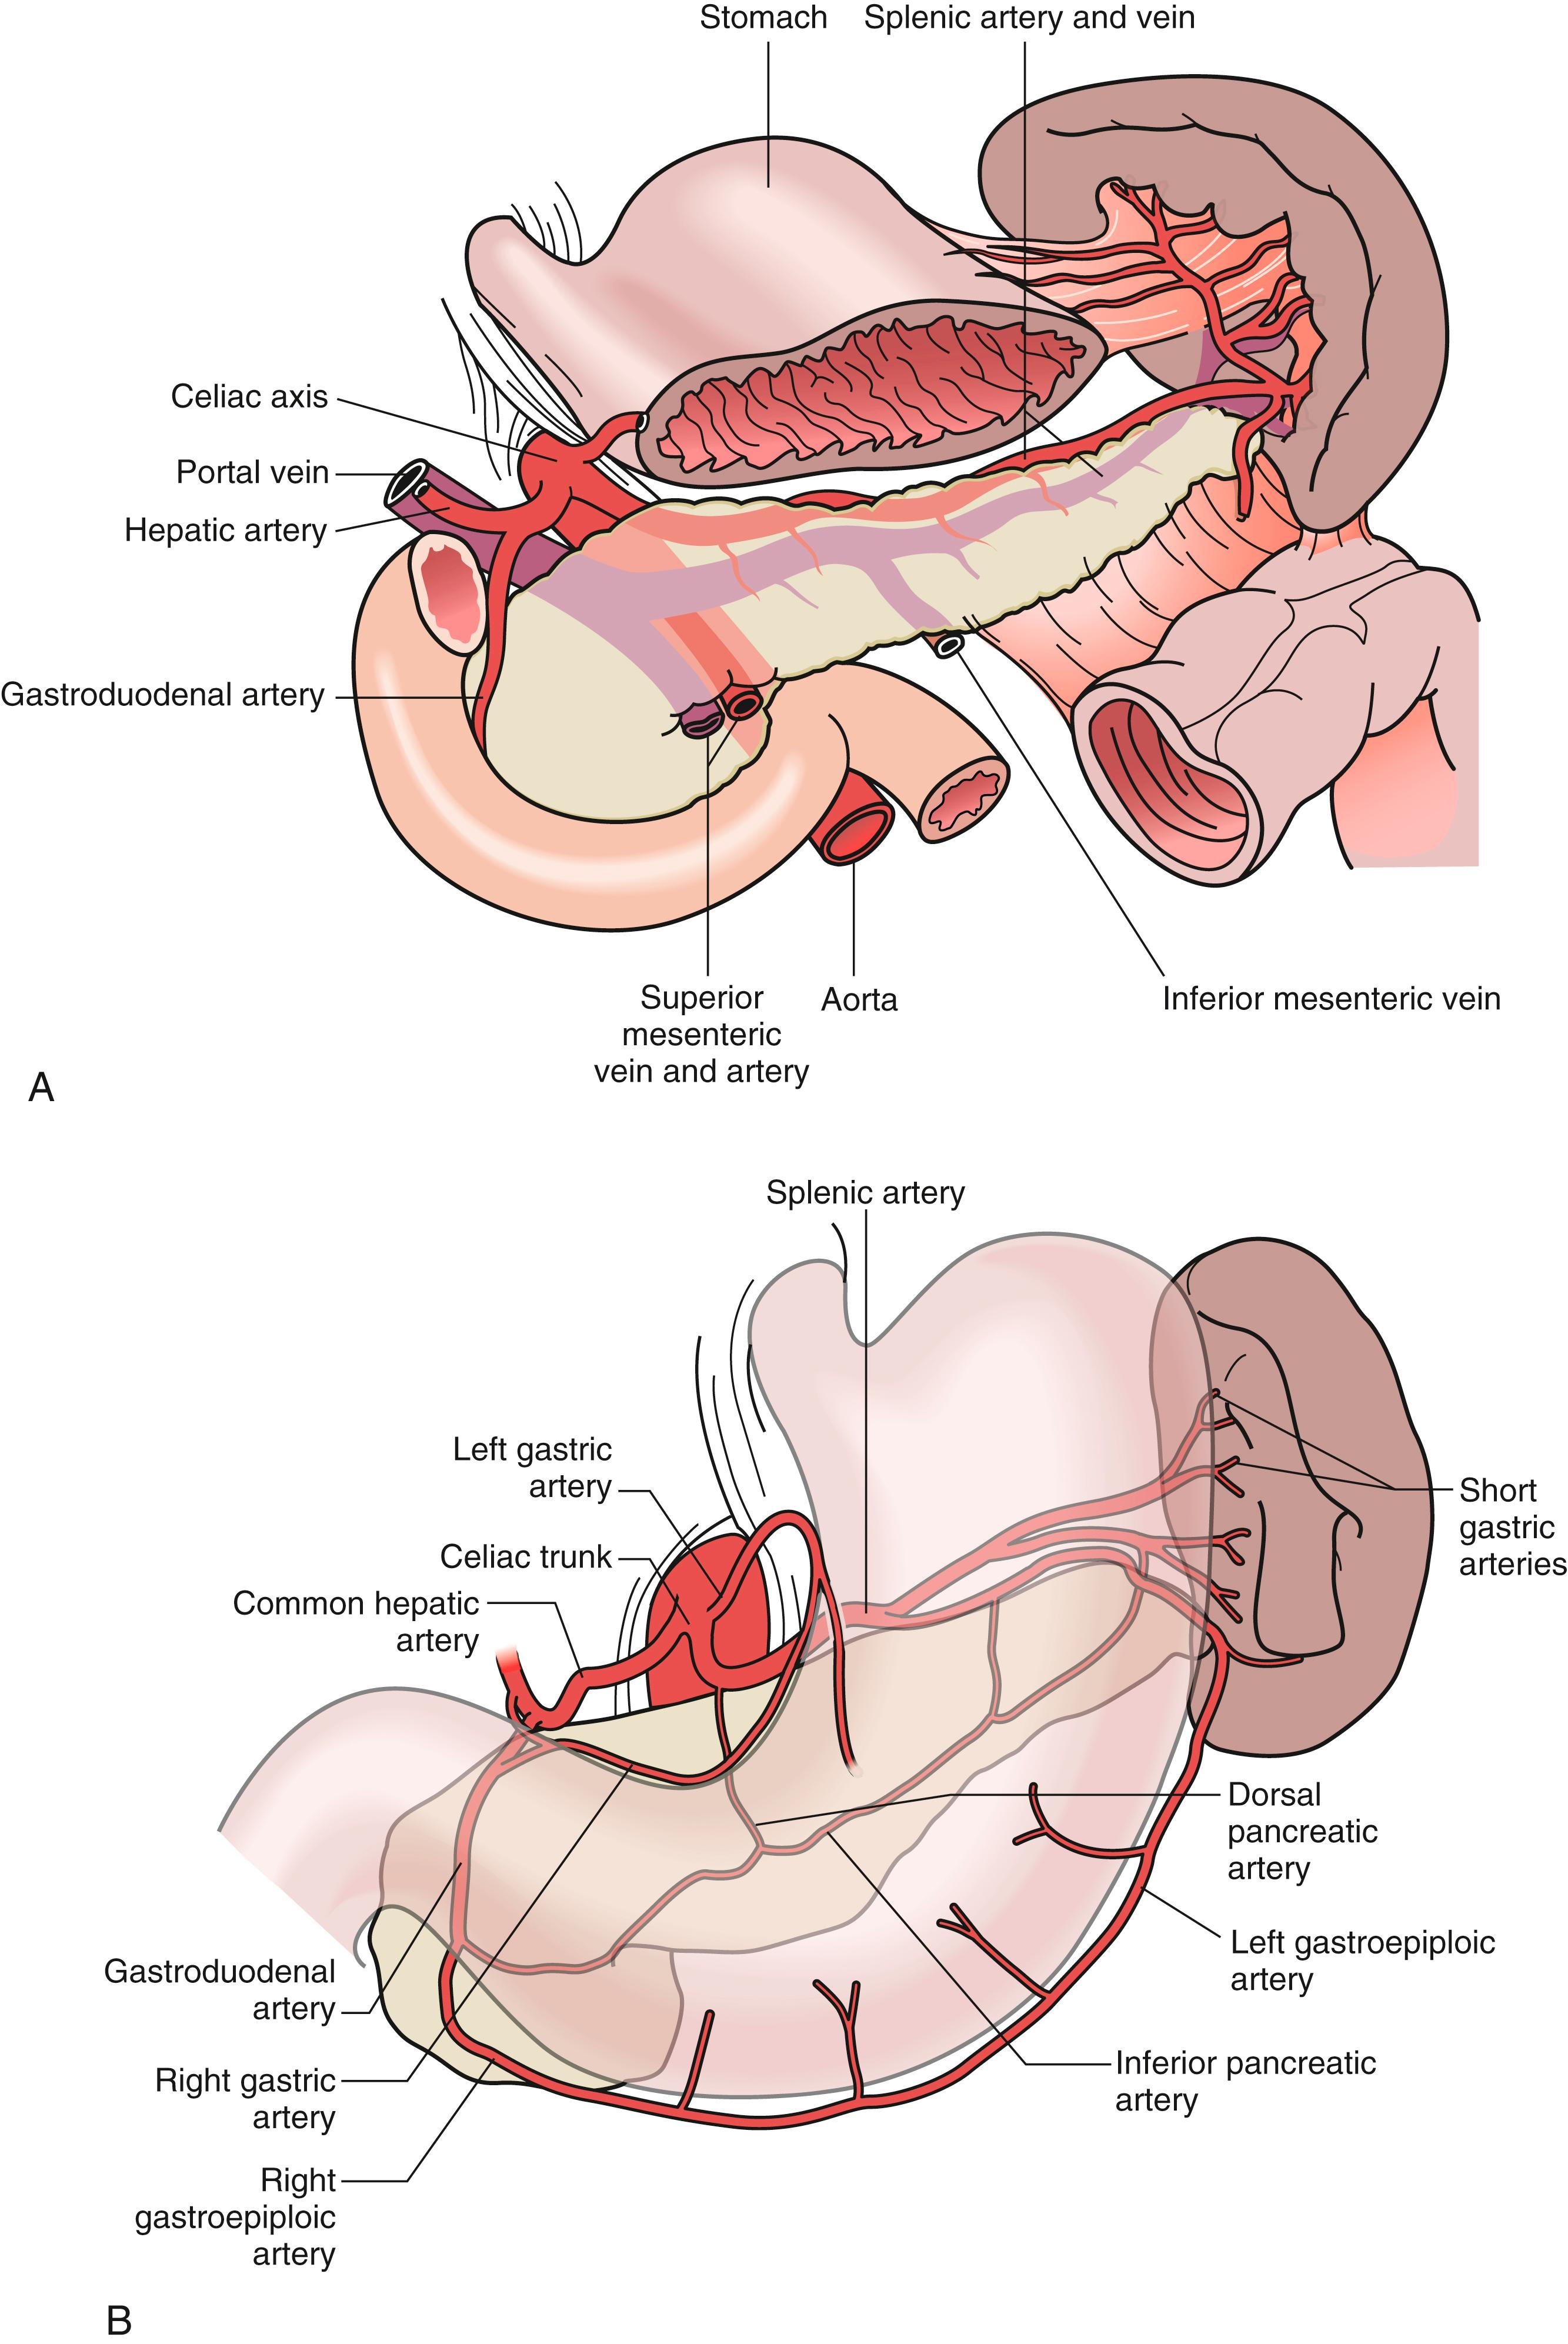 Fig. 57.3, Anatomic relationships of the splenic vasculature. The magistral type of splenic artery anatomy (A) occurs in 30% of individuals. The more common distributed type of anatomy (B) occurs in 70% of individuals.